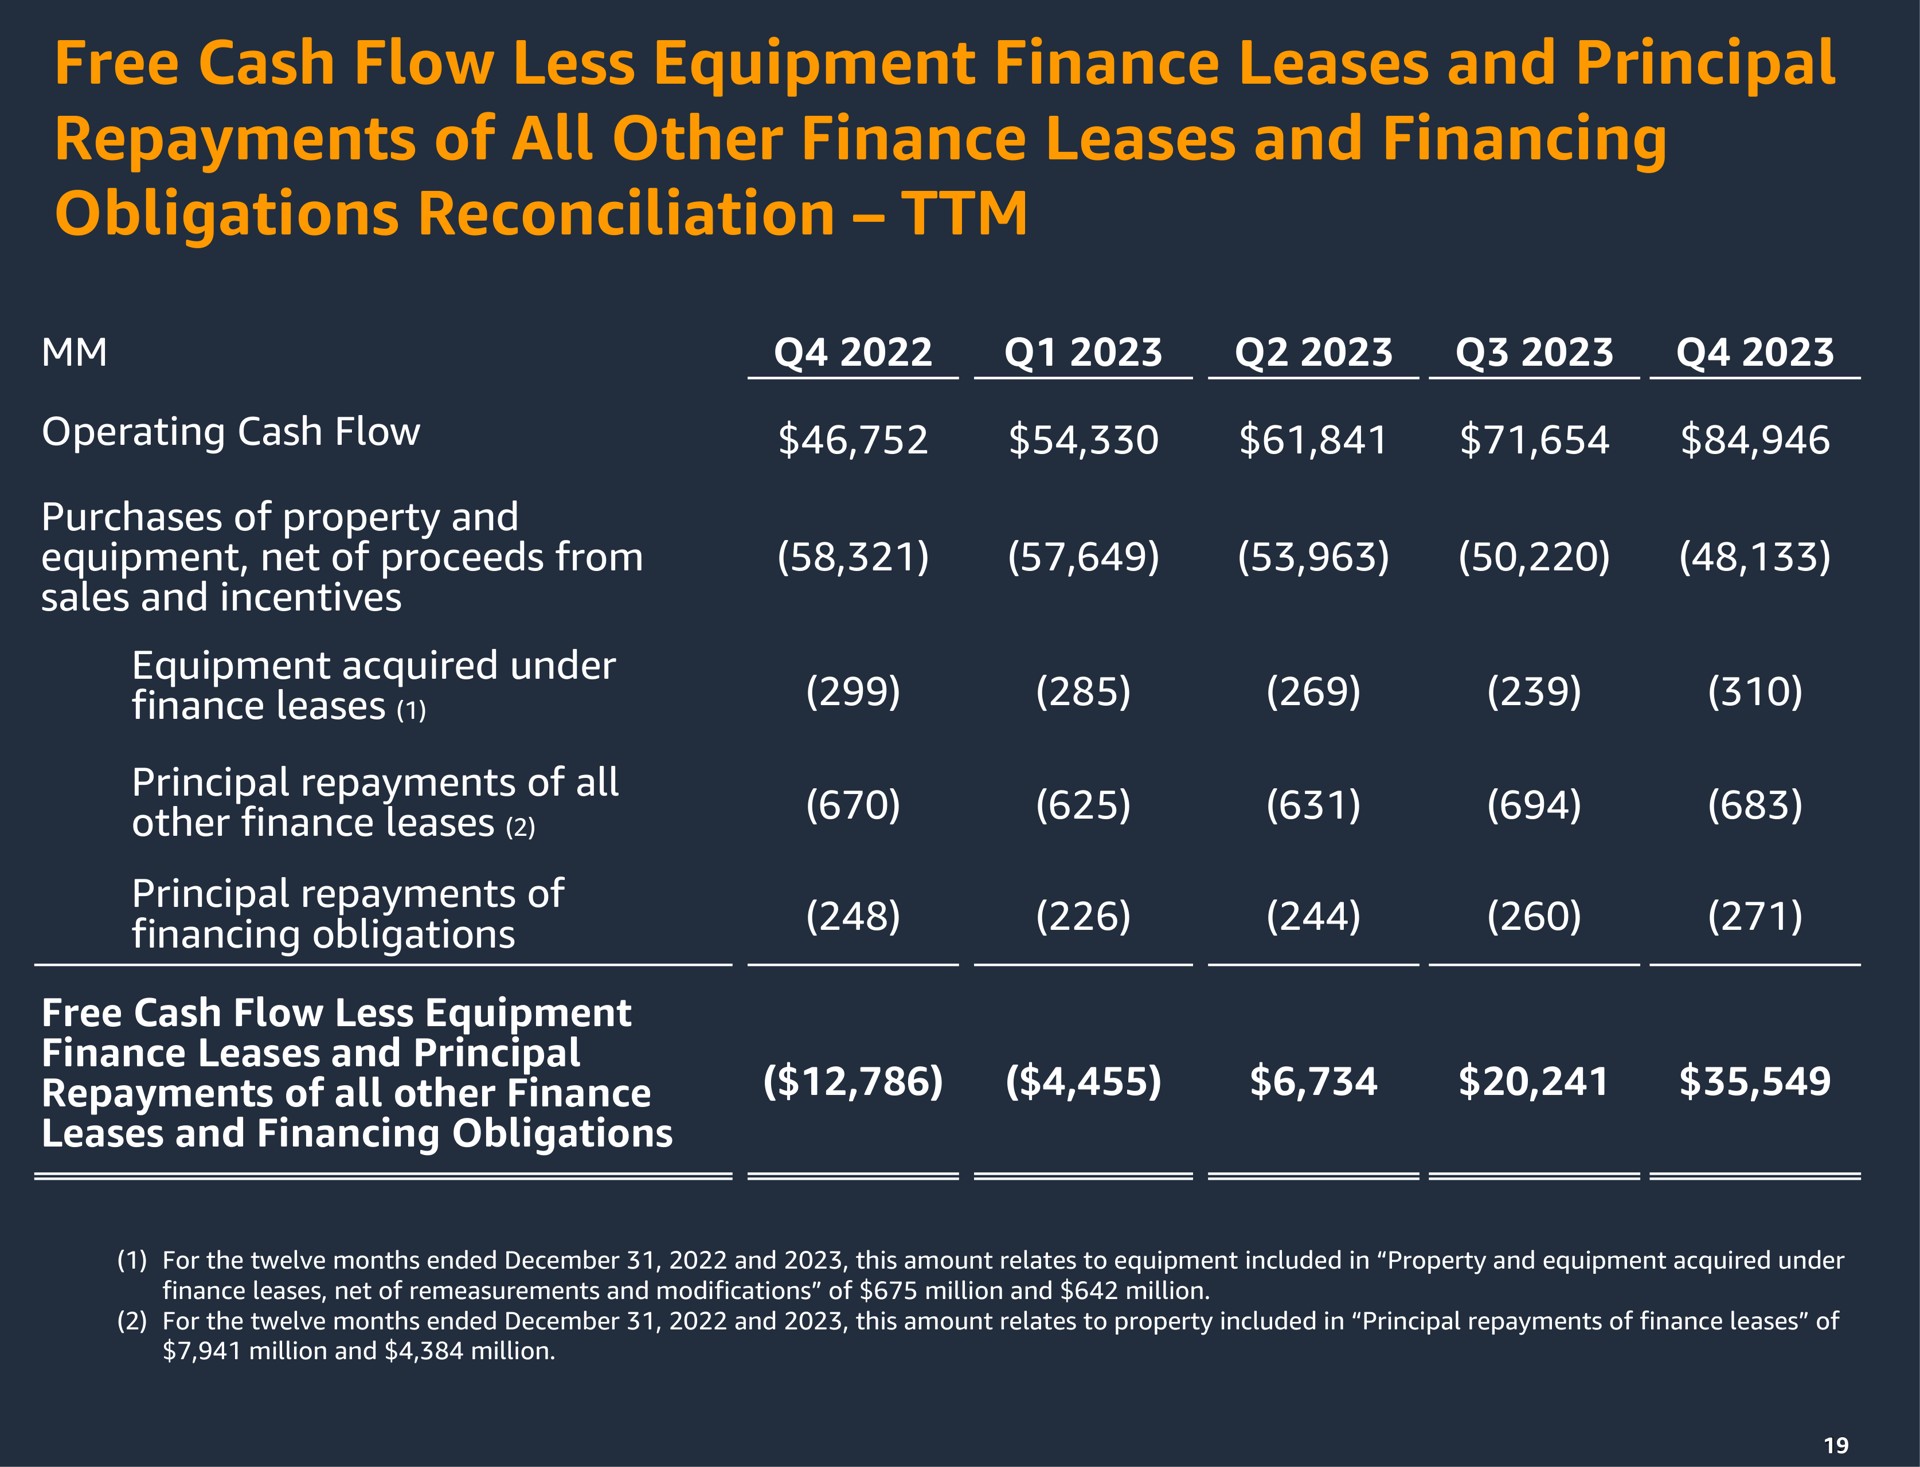 free cash flow less equipment finance leases and principal repayments of all other finance leases and financing obligations reconciliation | Amazon